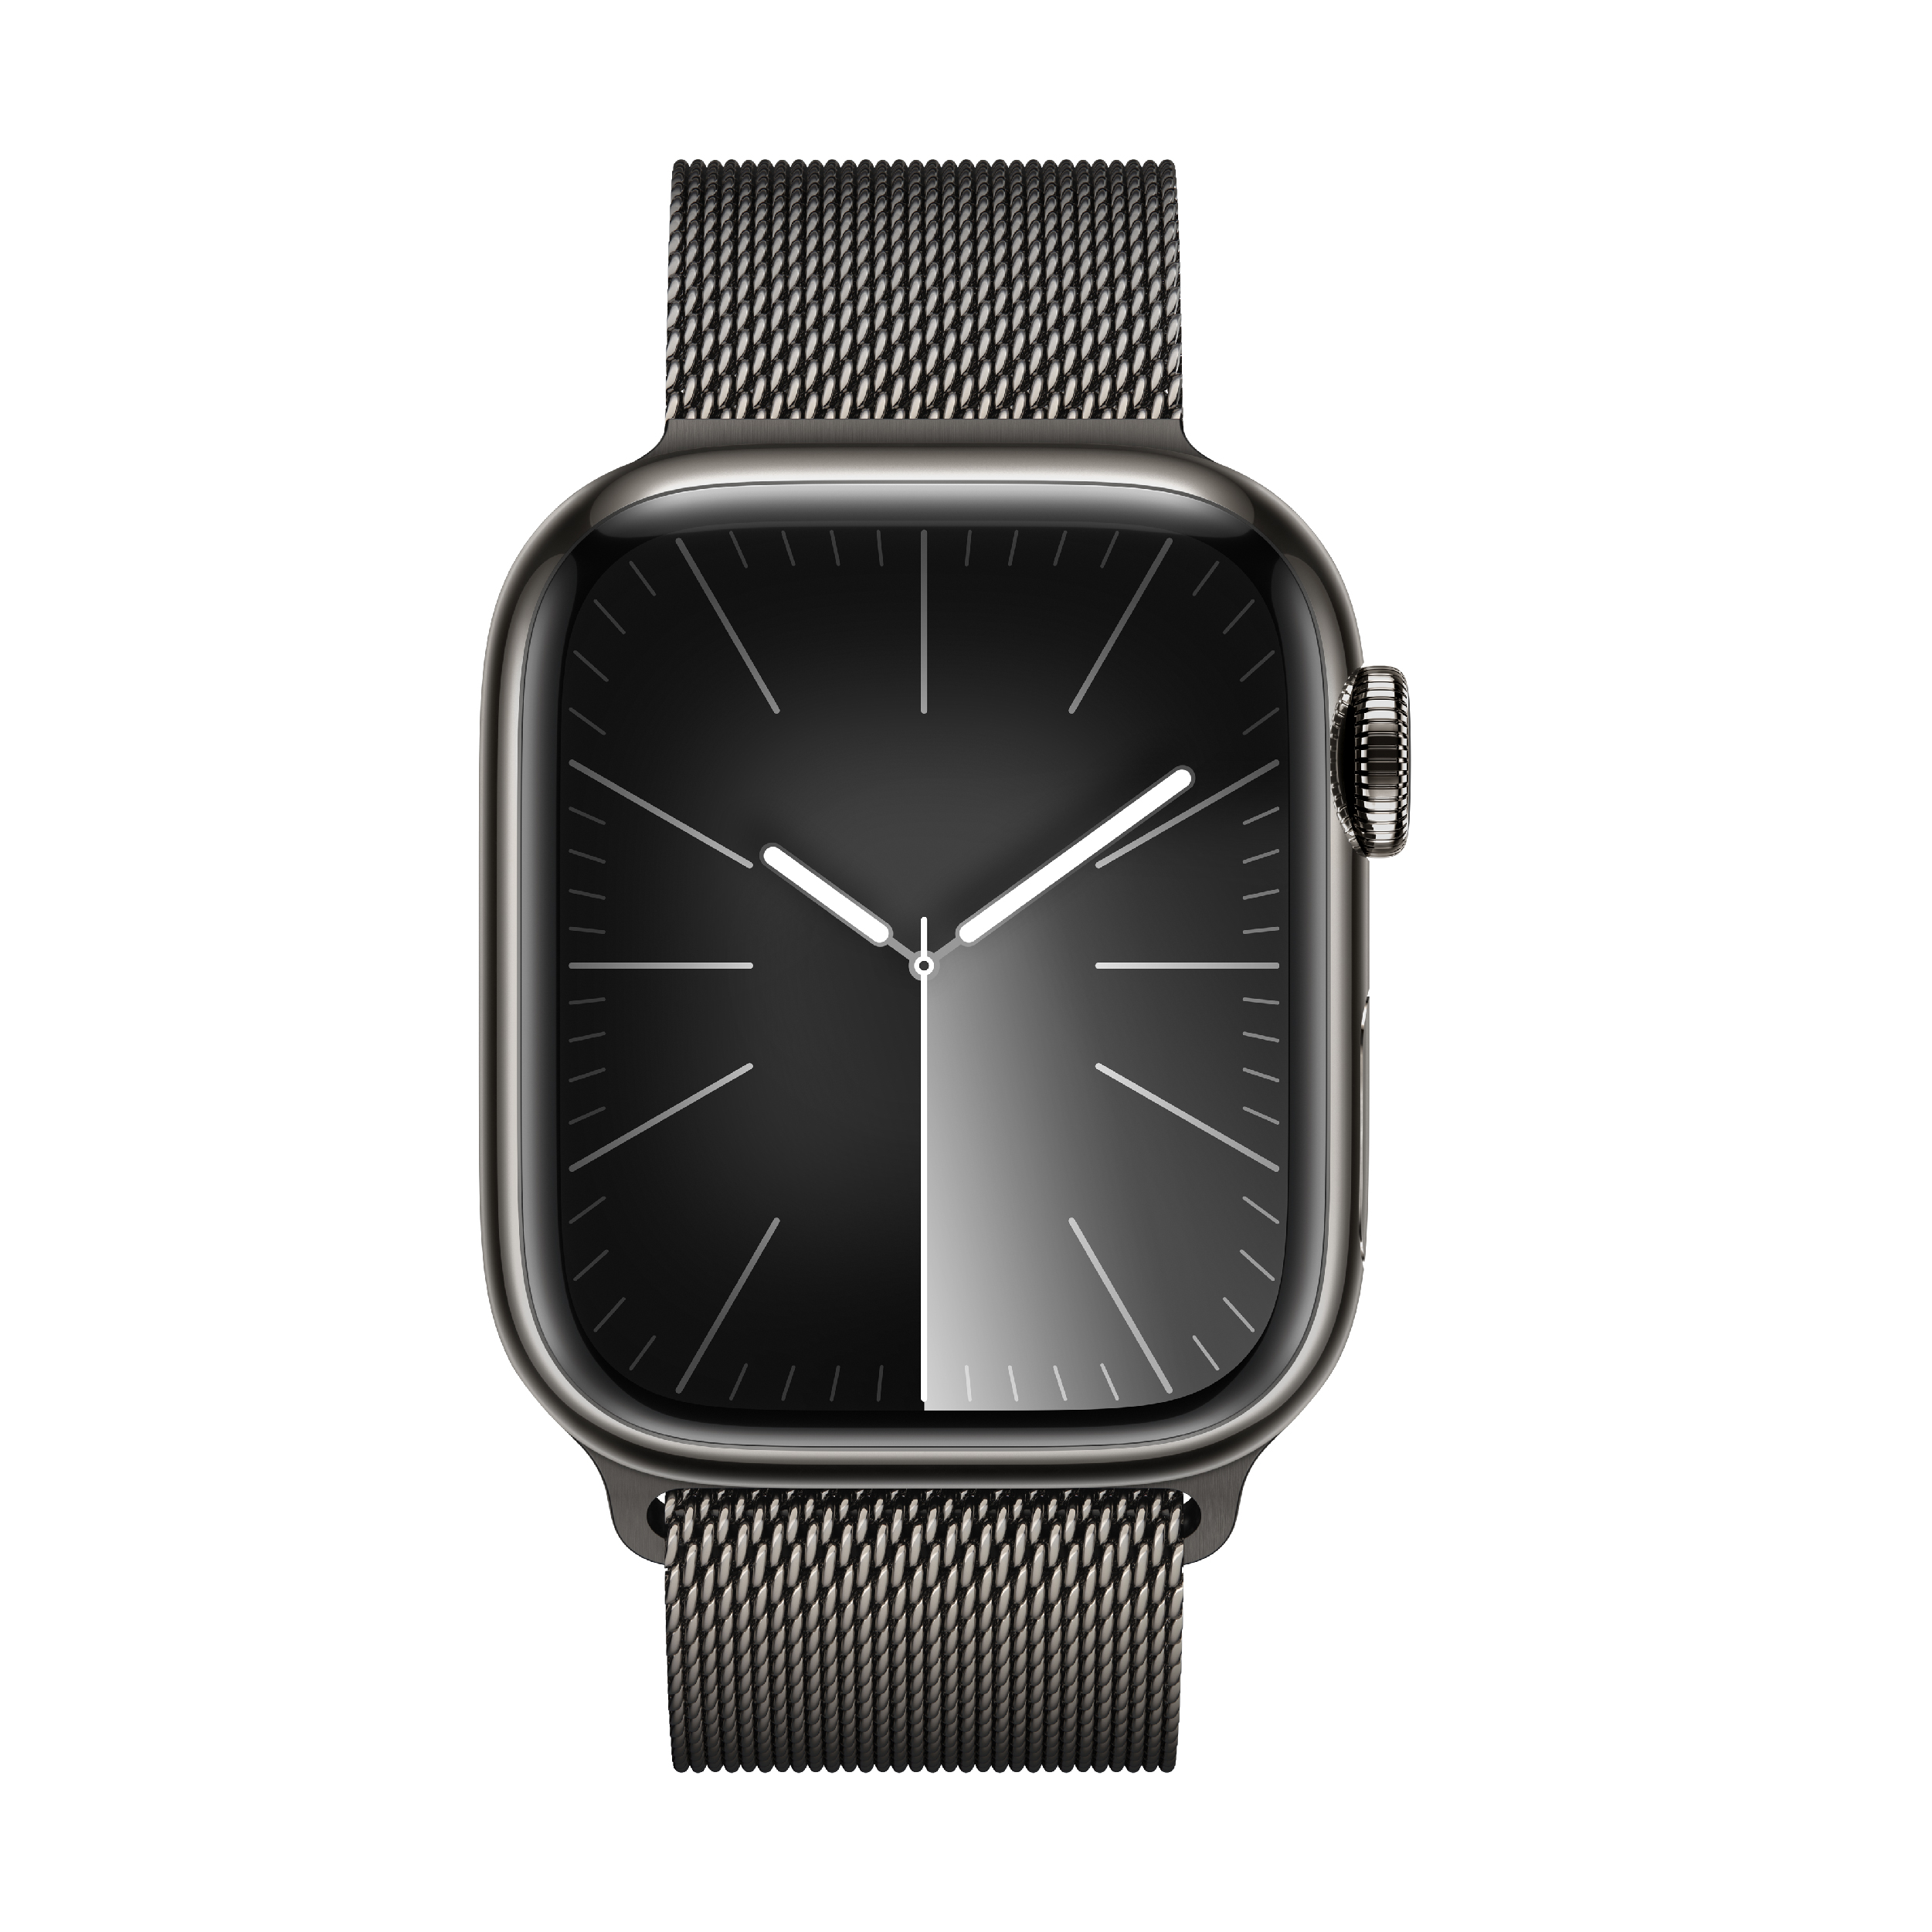 APPLE Smartwatch Series 9 GPS + Cellular 41mm, Graphite Stainless Steel with Graphite Milanese Loop Strap